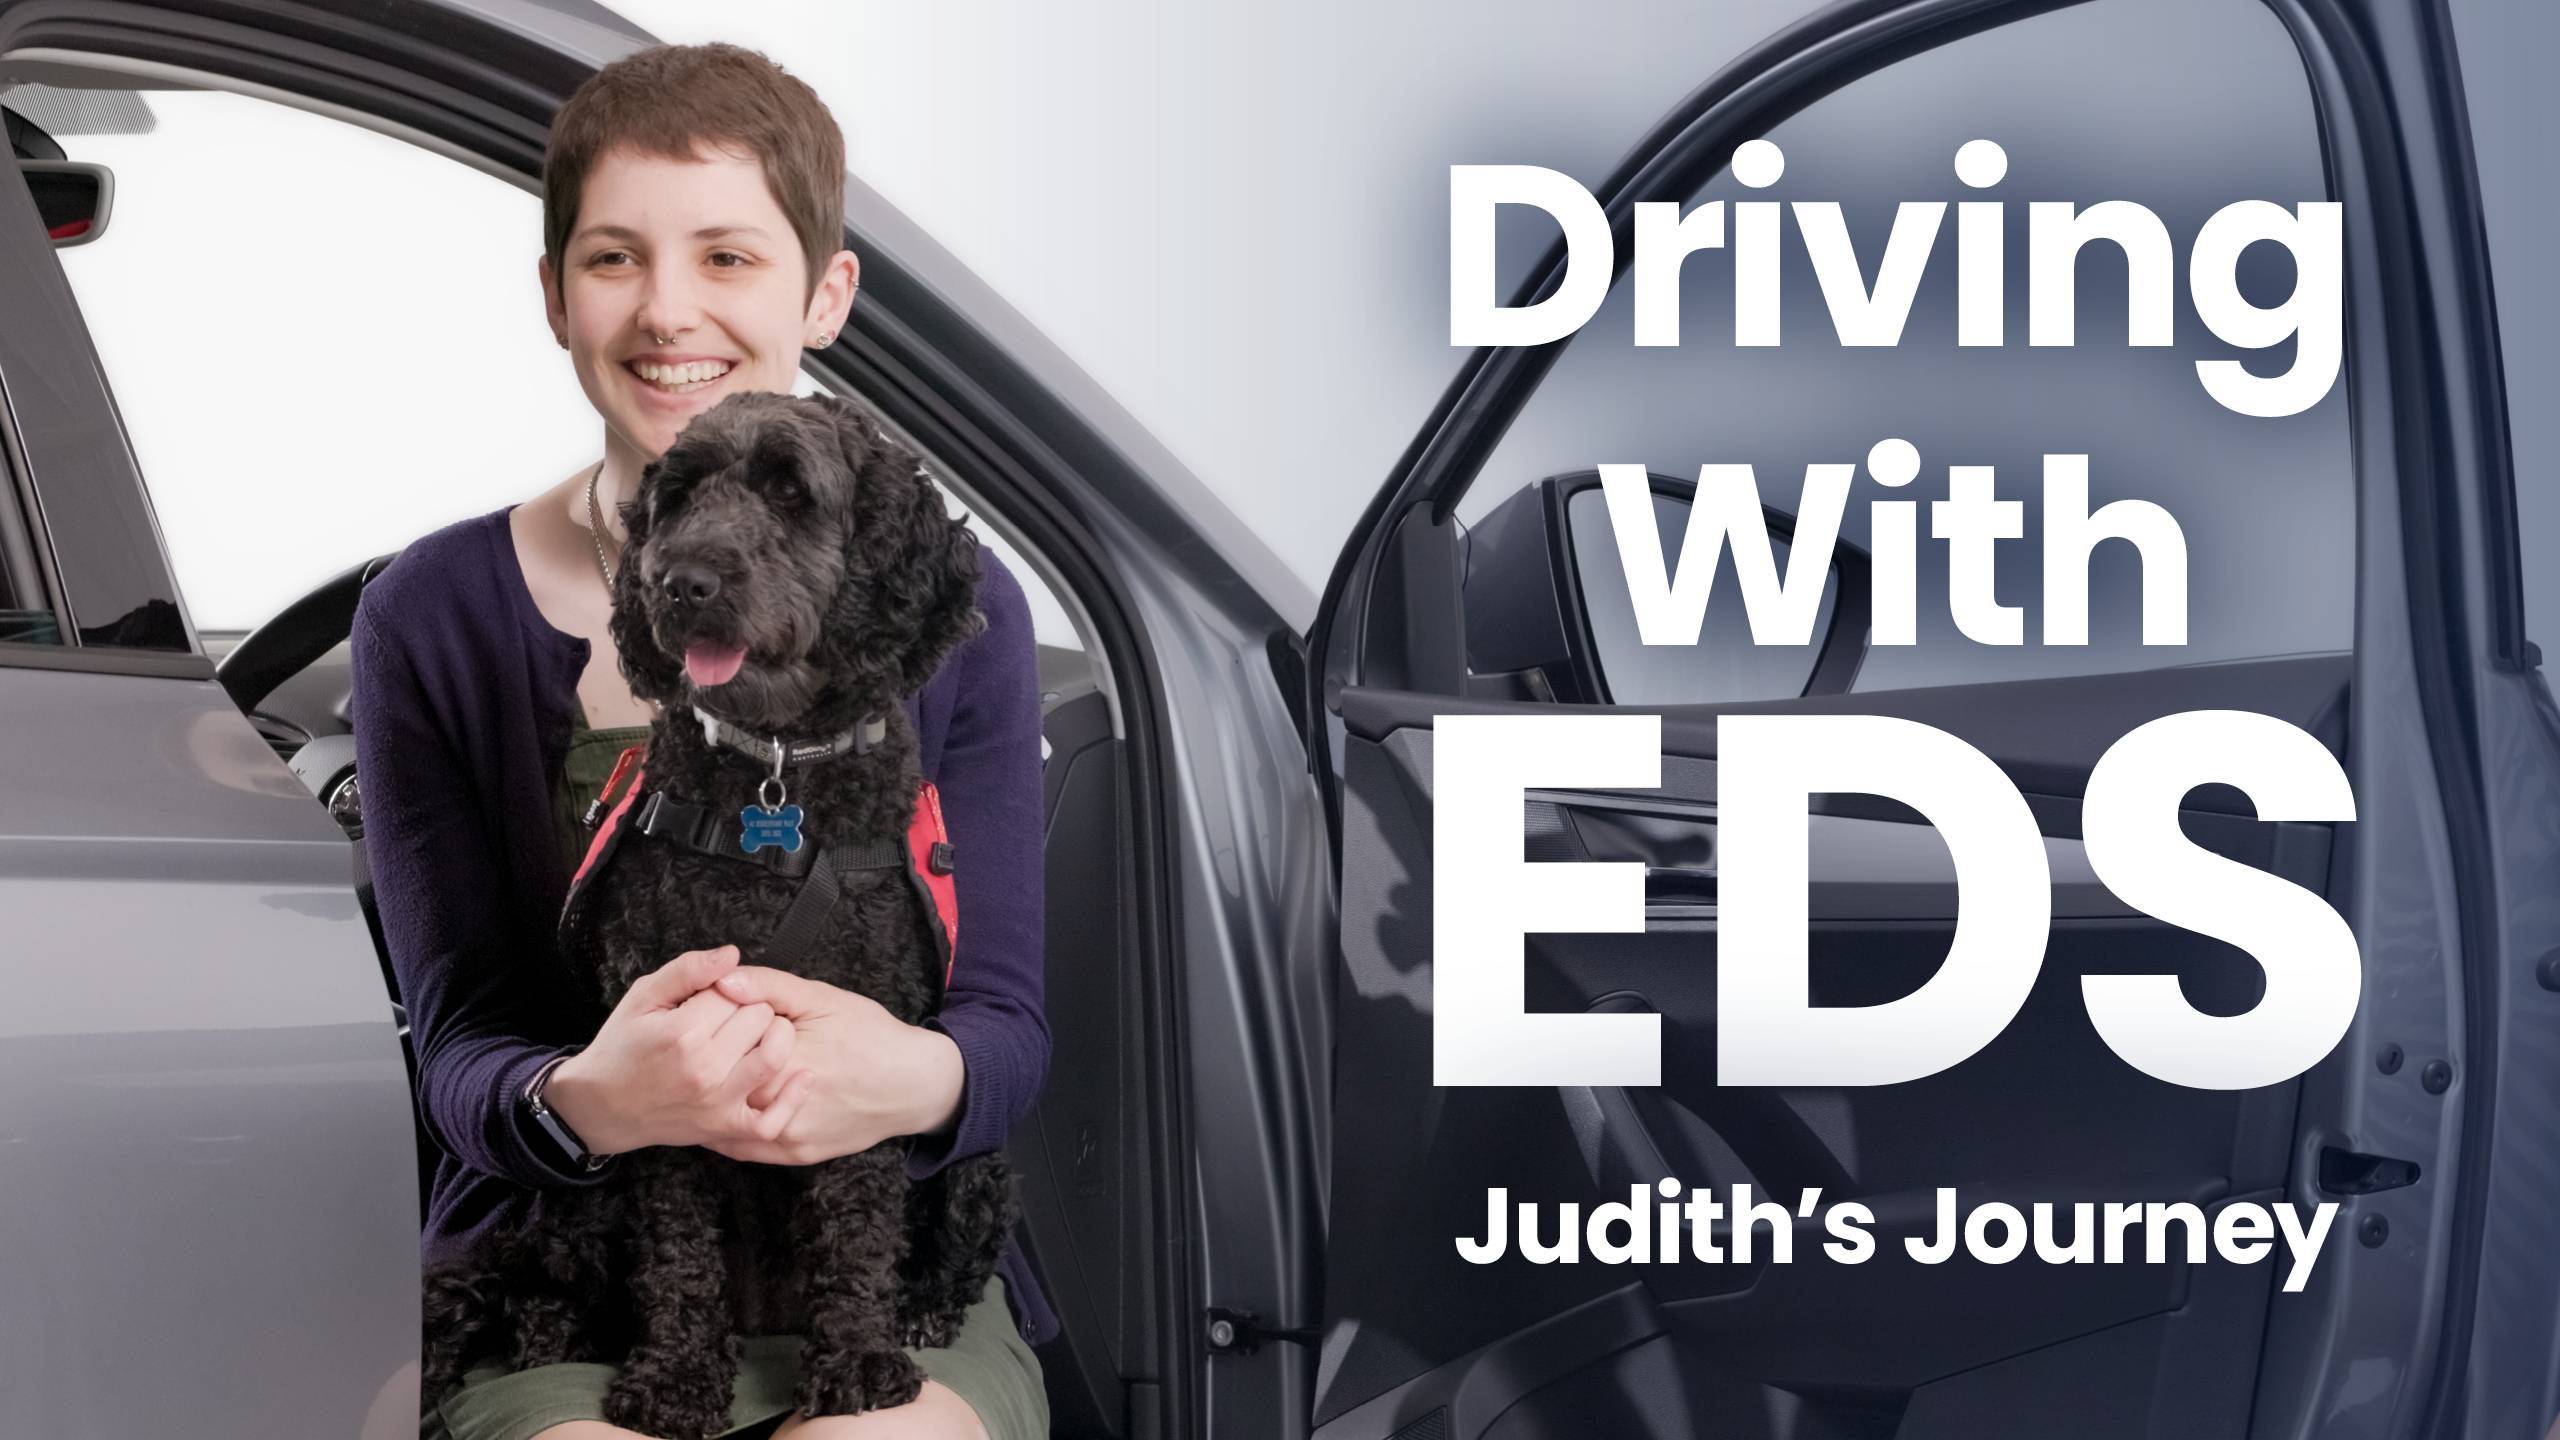 Judith with her assistance dog in car smiling - Driving With EDS